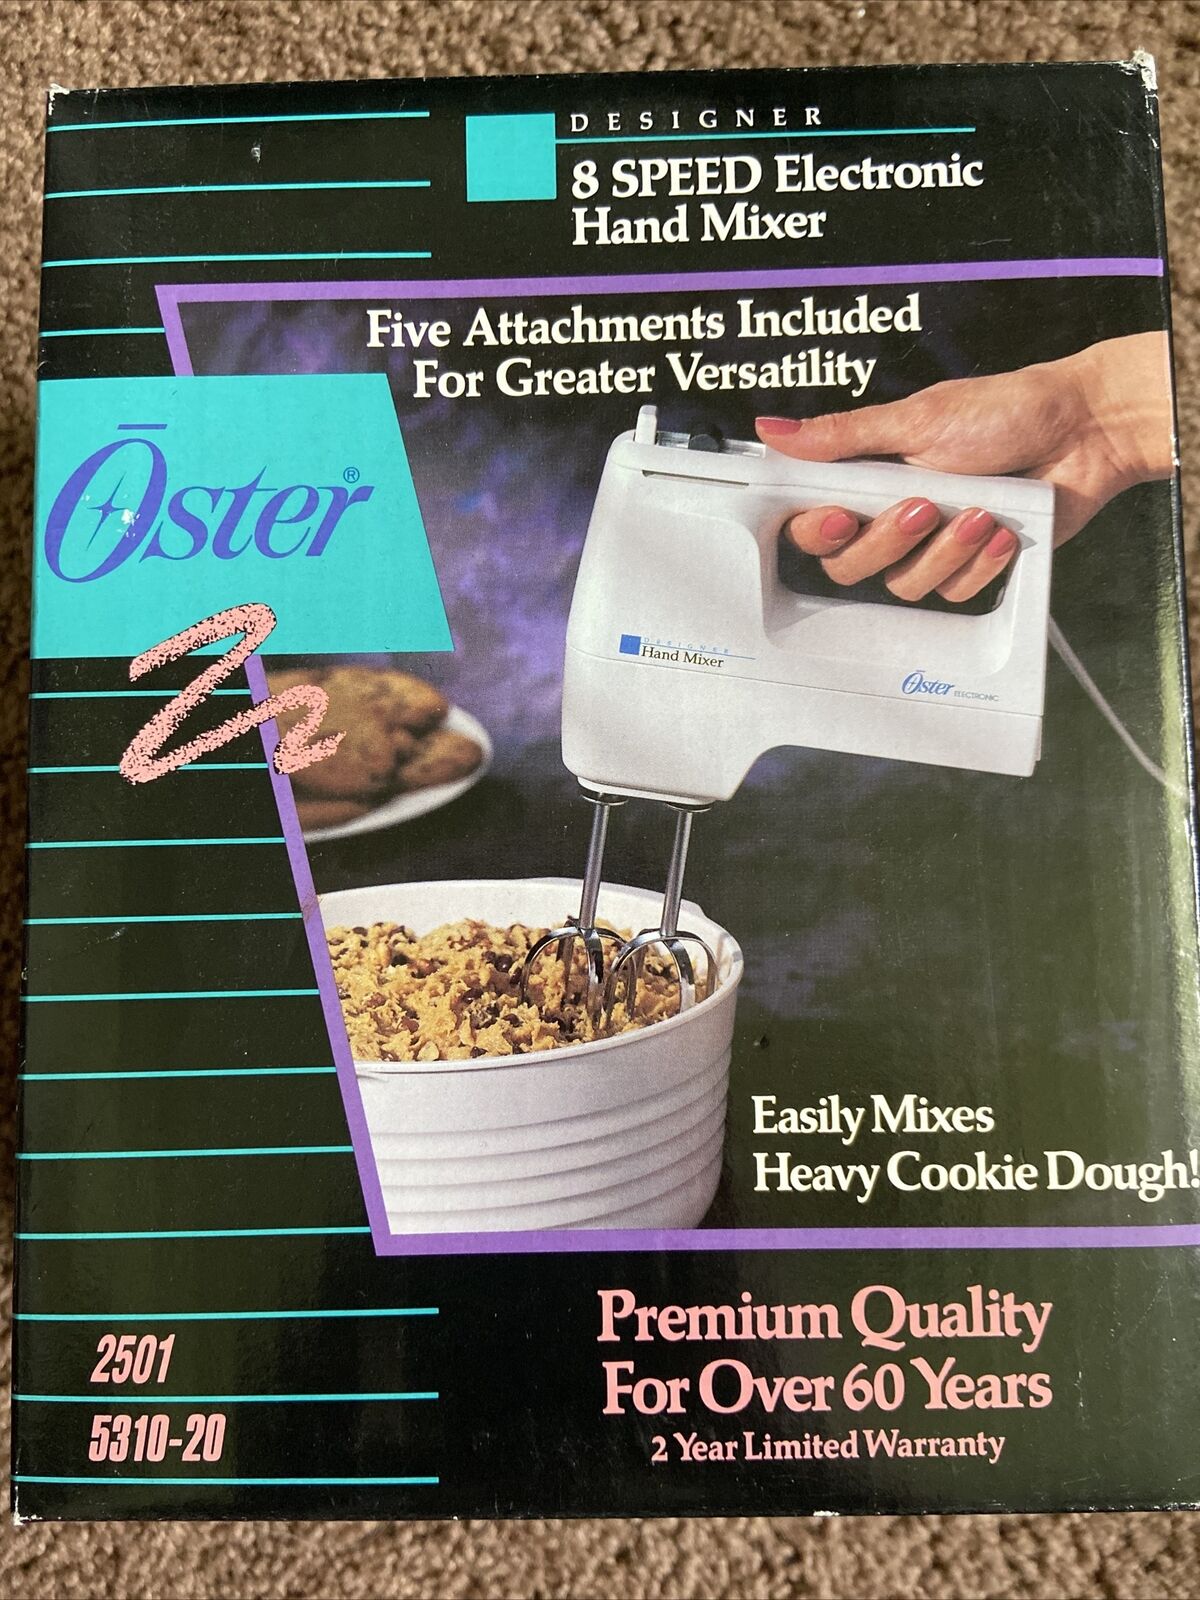 Vintage Oster 2501 5310-20 8 Speed Electronic Hand Mixer All Att